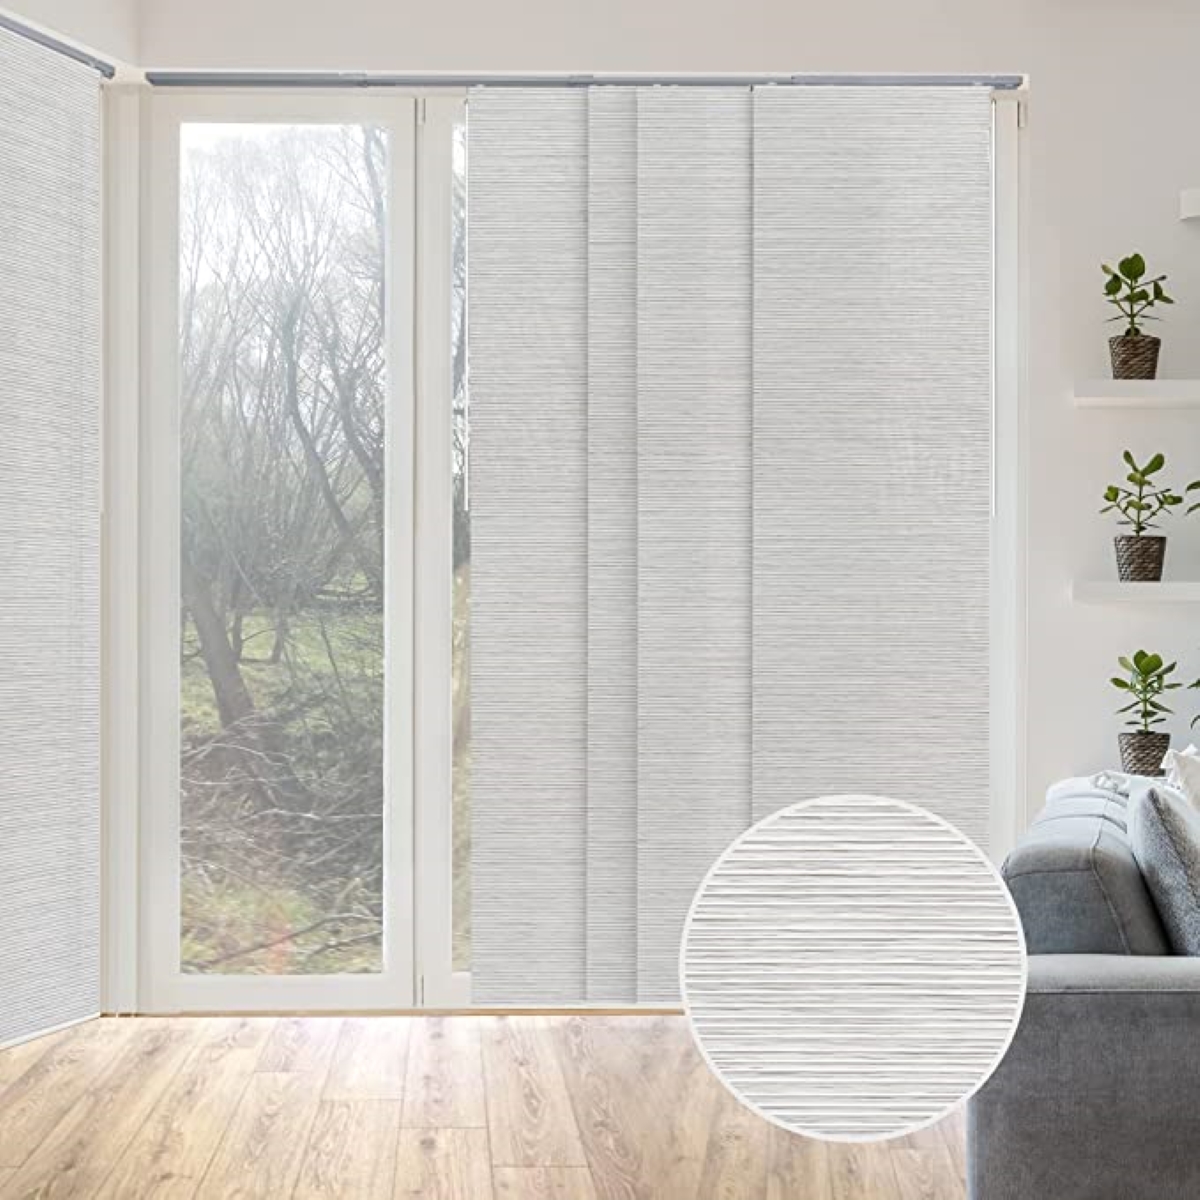 types of blinds - panel blinds on glass door